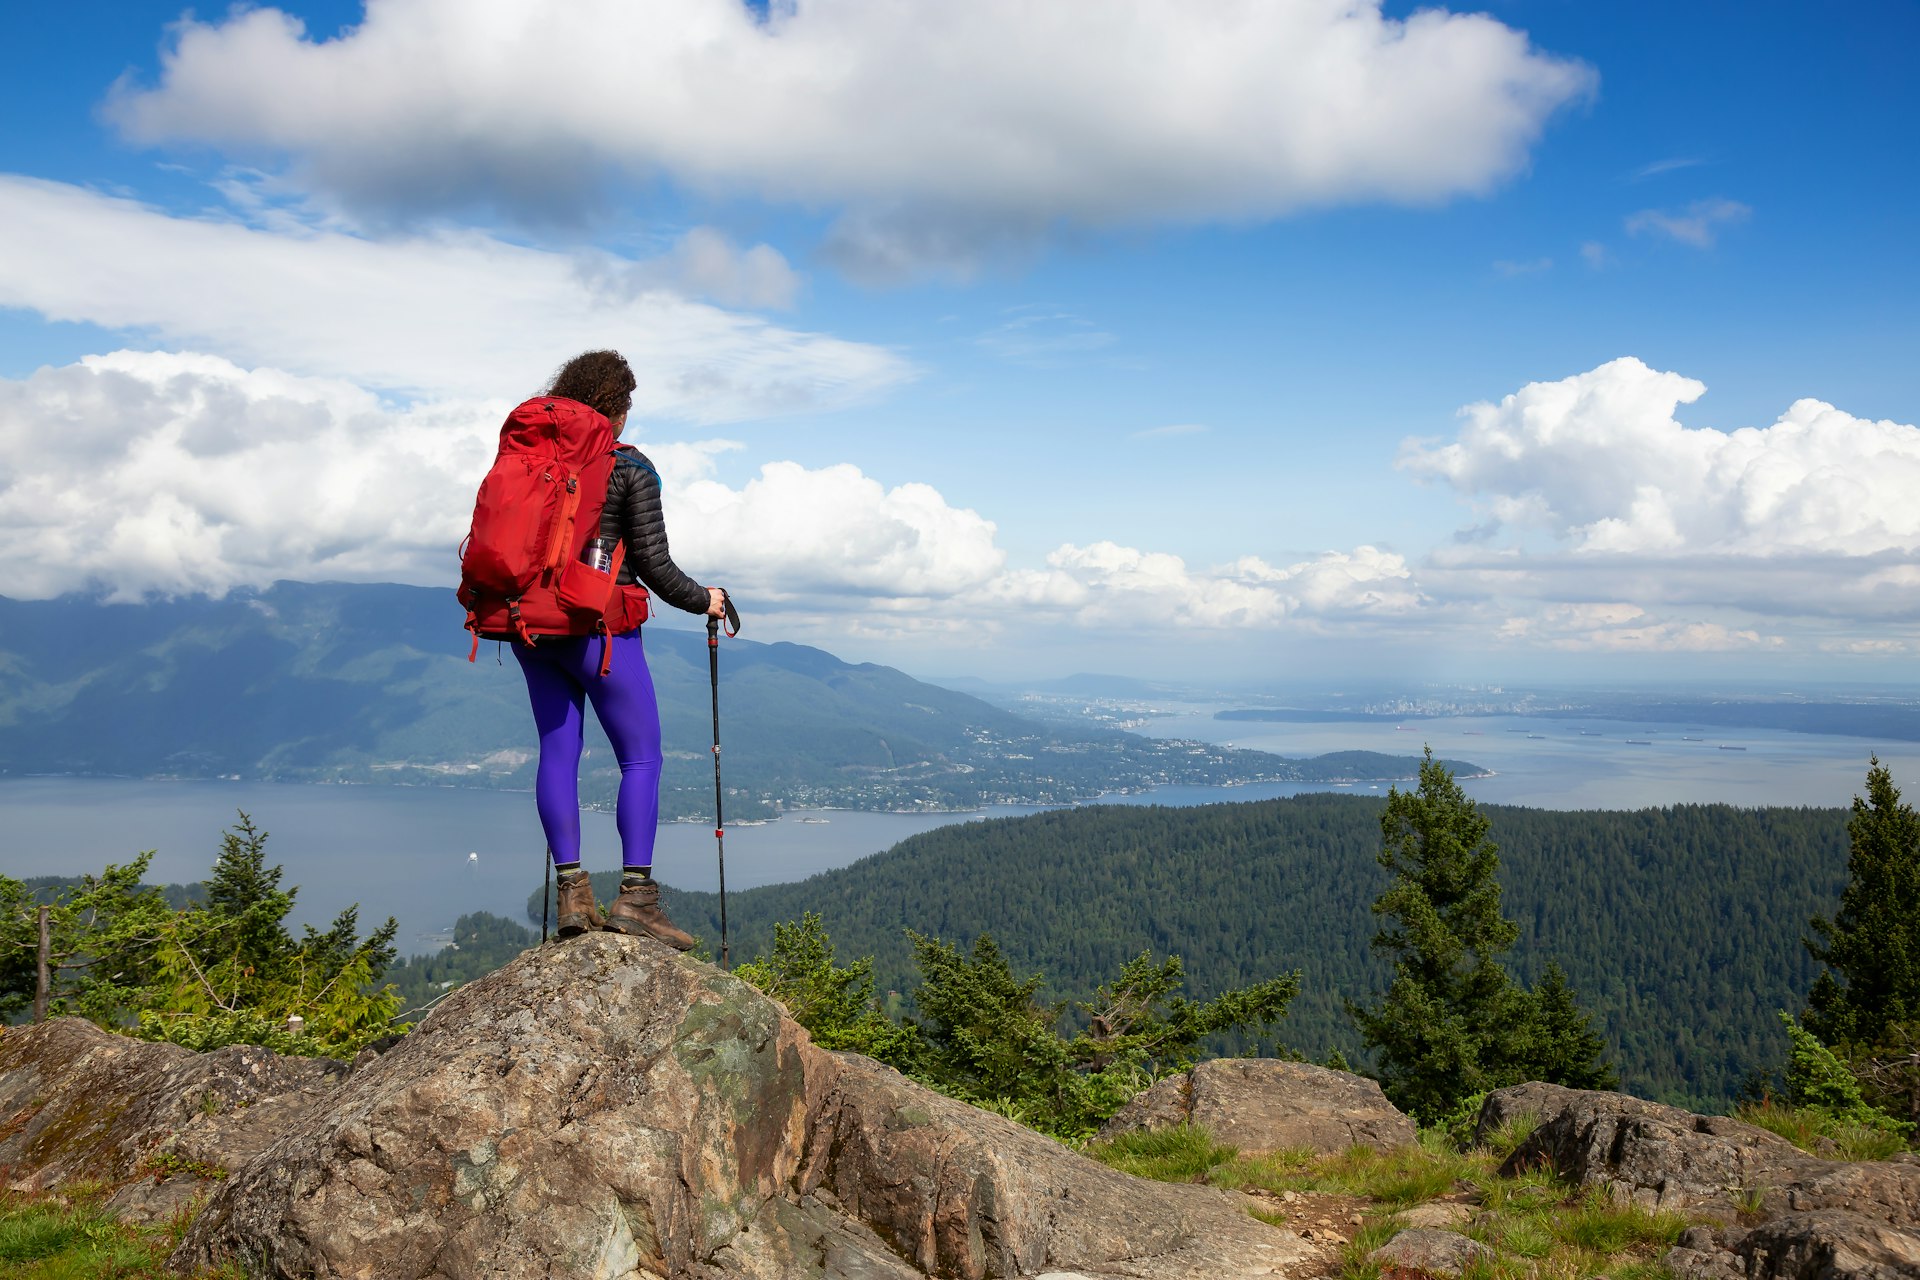 A hiker on a hilltop overlooking the water, Bowen Island, British Columbia, Canada